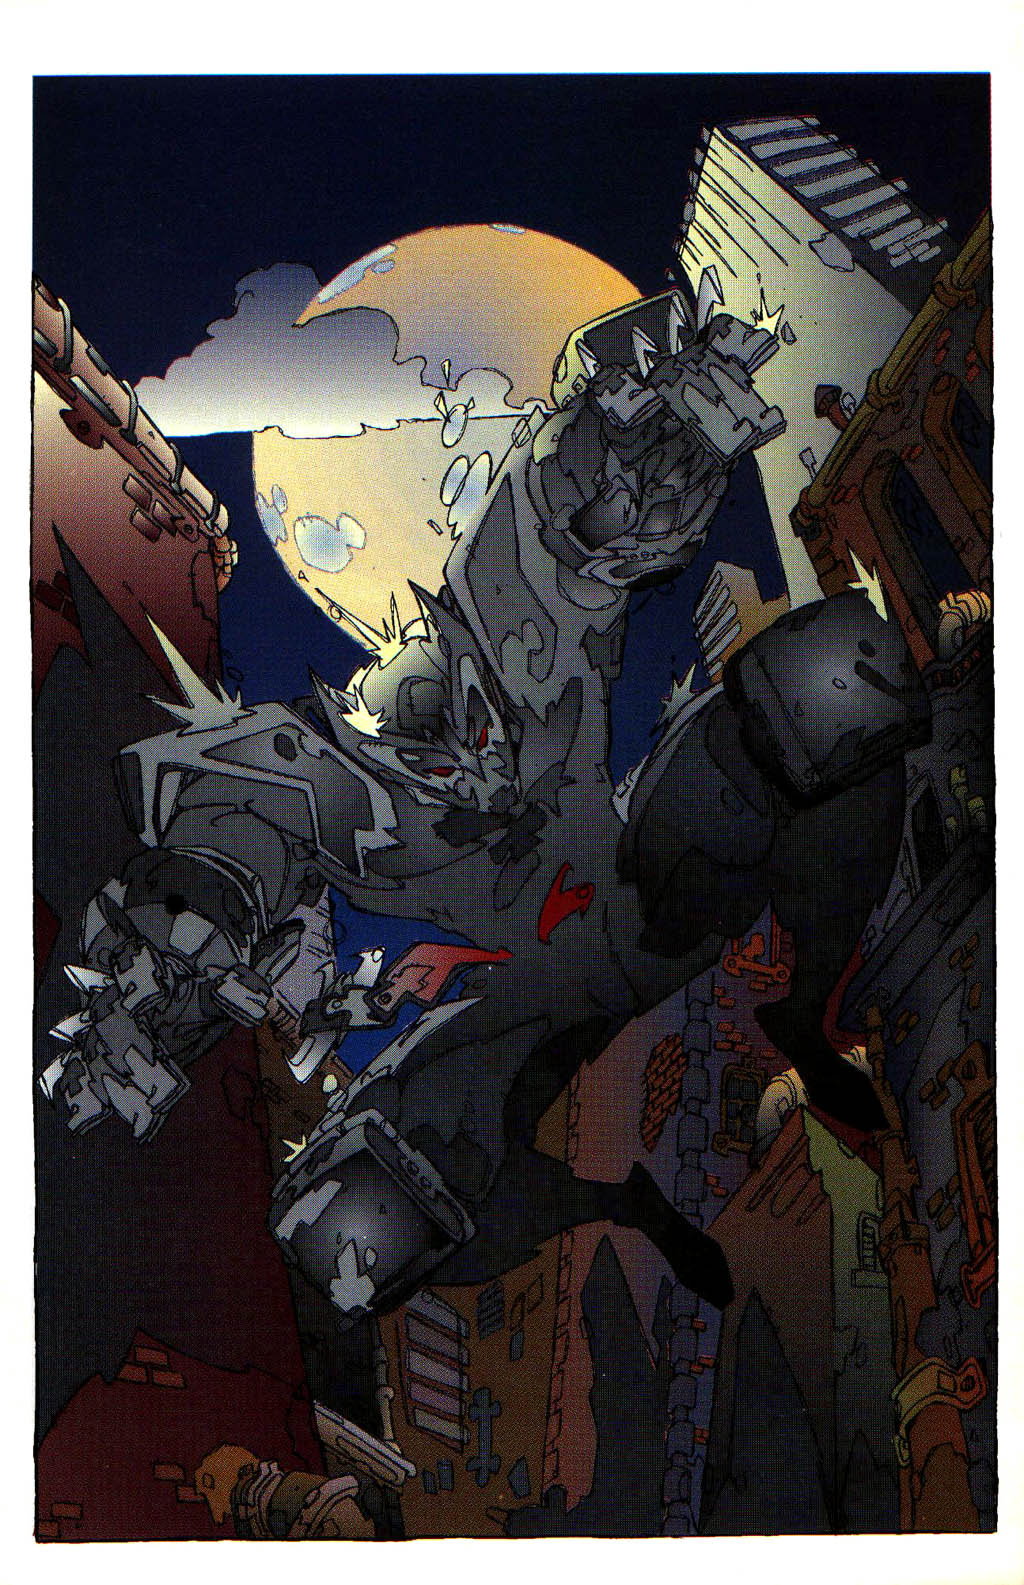 Read online Images of ShadowHawk comic -  Issue #1 - 4